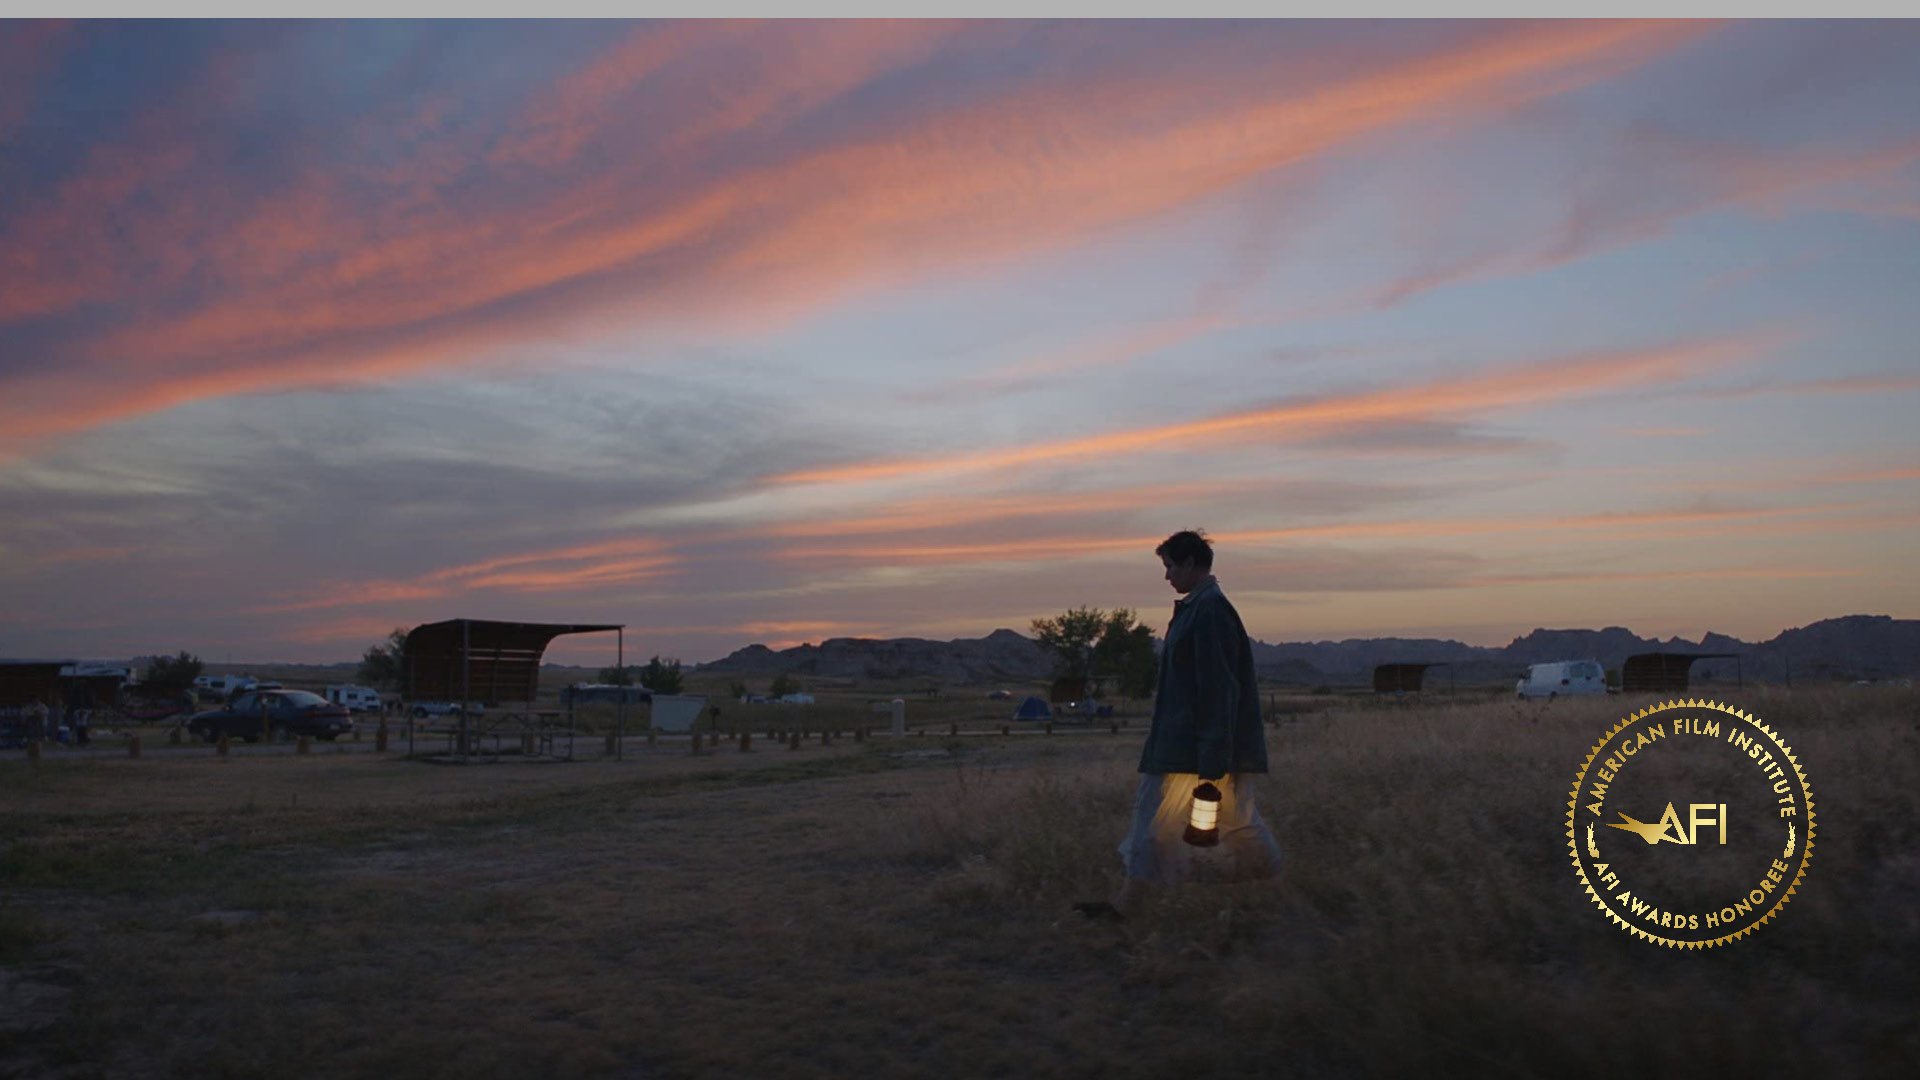 In the righthand lower corner is the AFI AWARDS logo. The image is a film still from NOMADLAND: Fern (Frances McDormand) is walking across an open field holding a lantern. The clouds, set against a blue-ish gray sky, are a tinged dark orange from the setting sun.